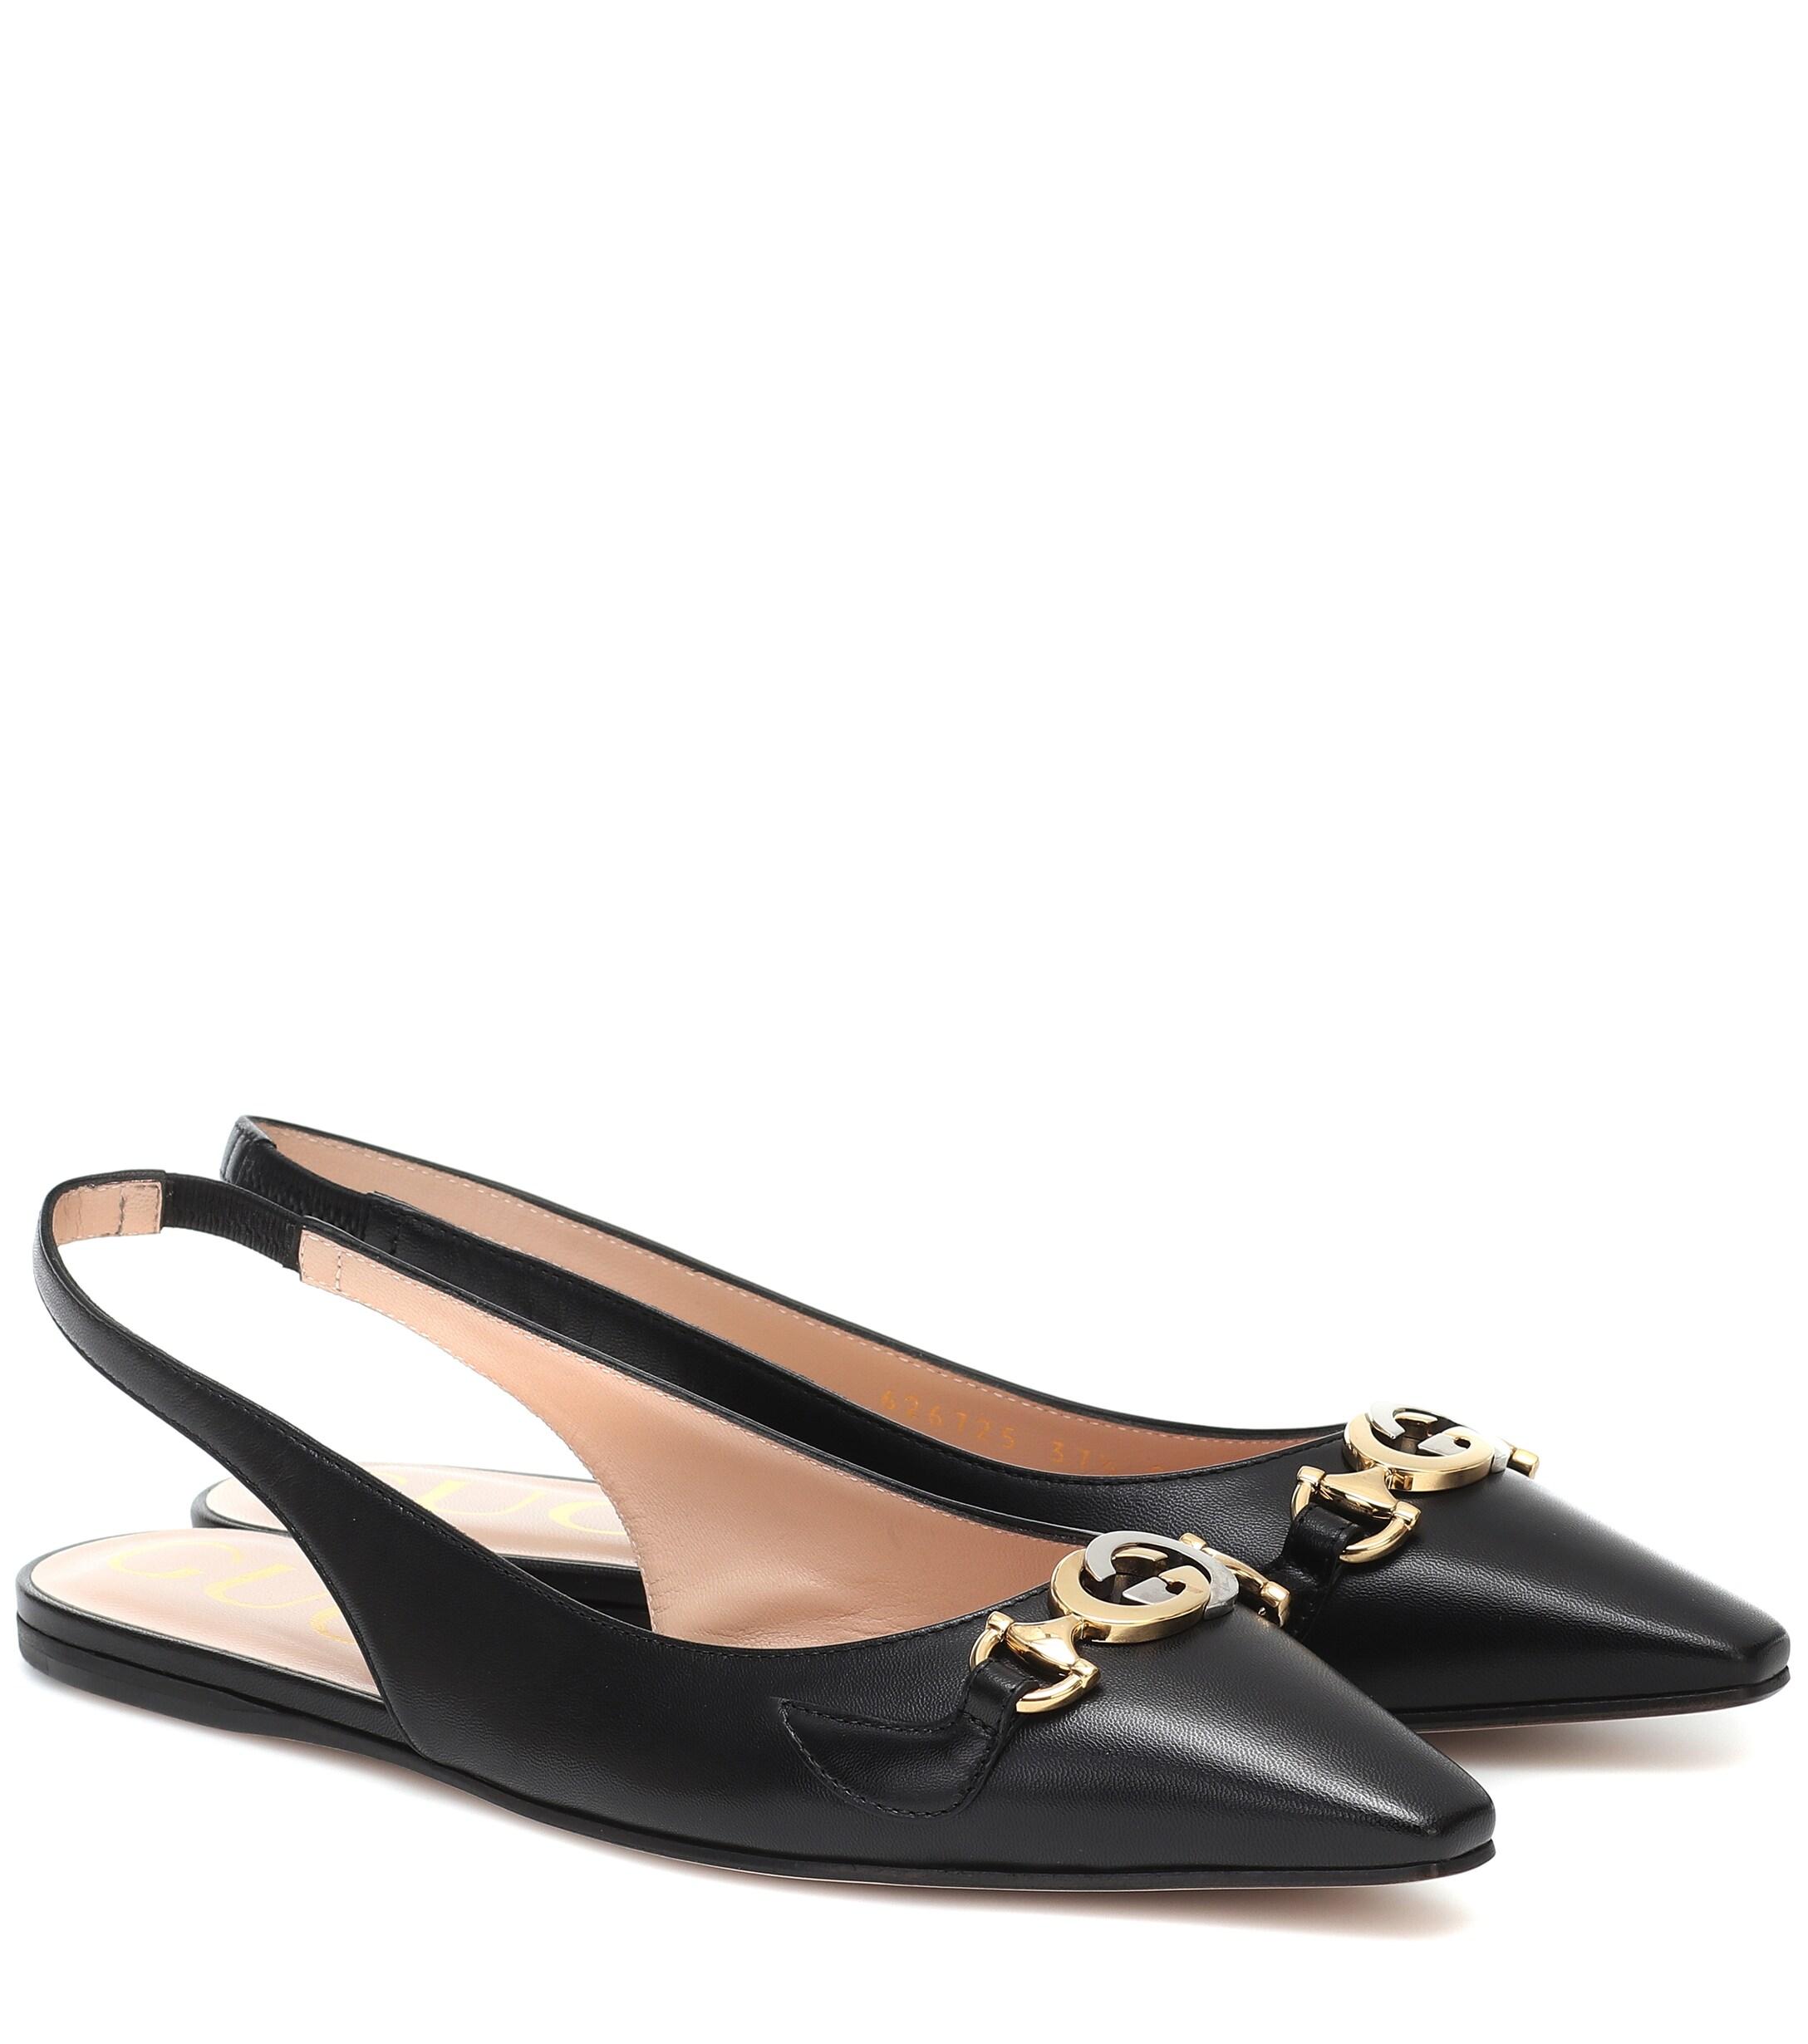 Gucci Leather Slingback Ballet Flats in Black | Lyst